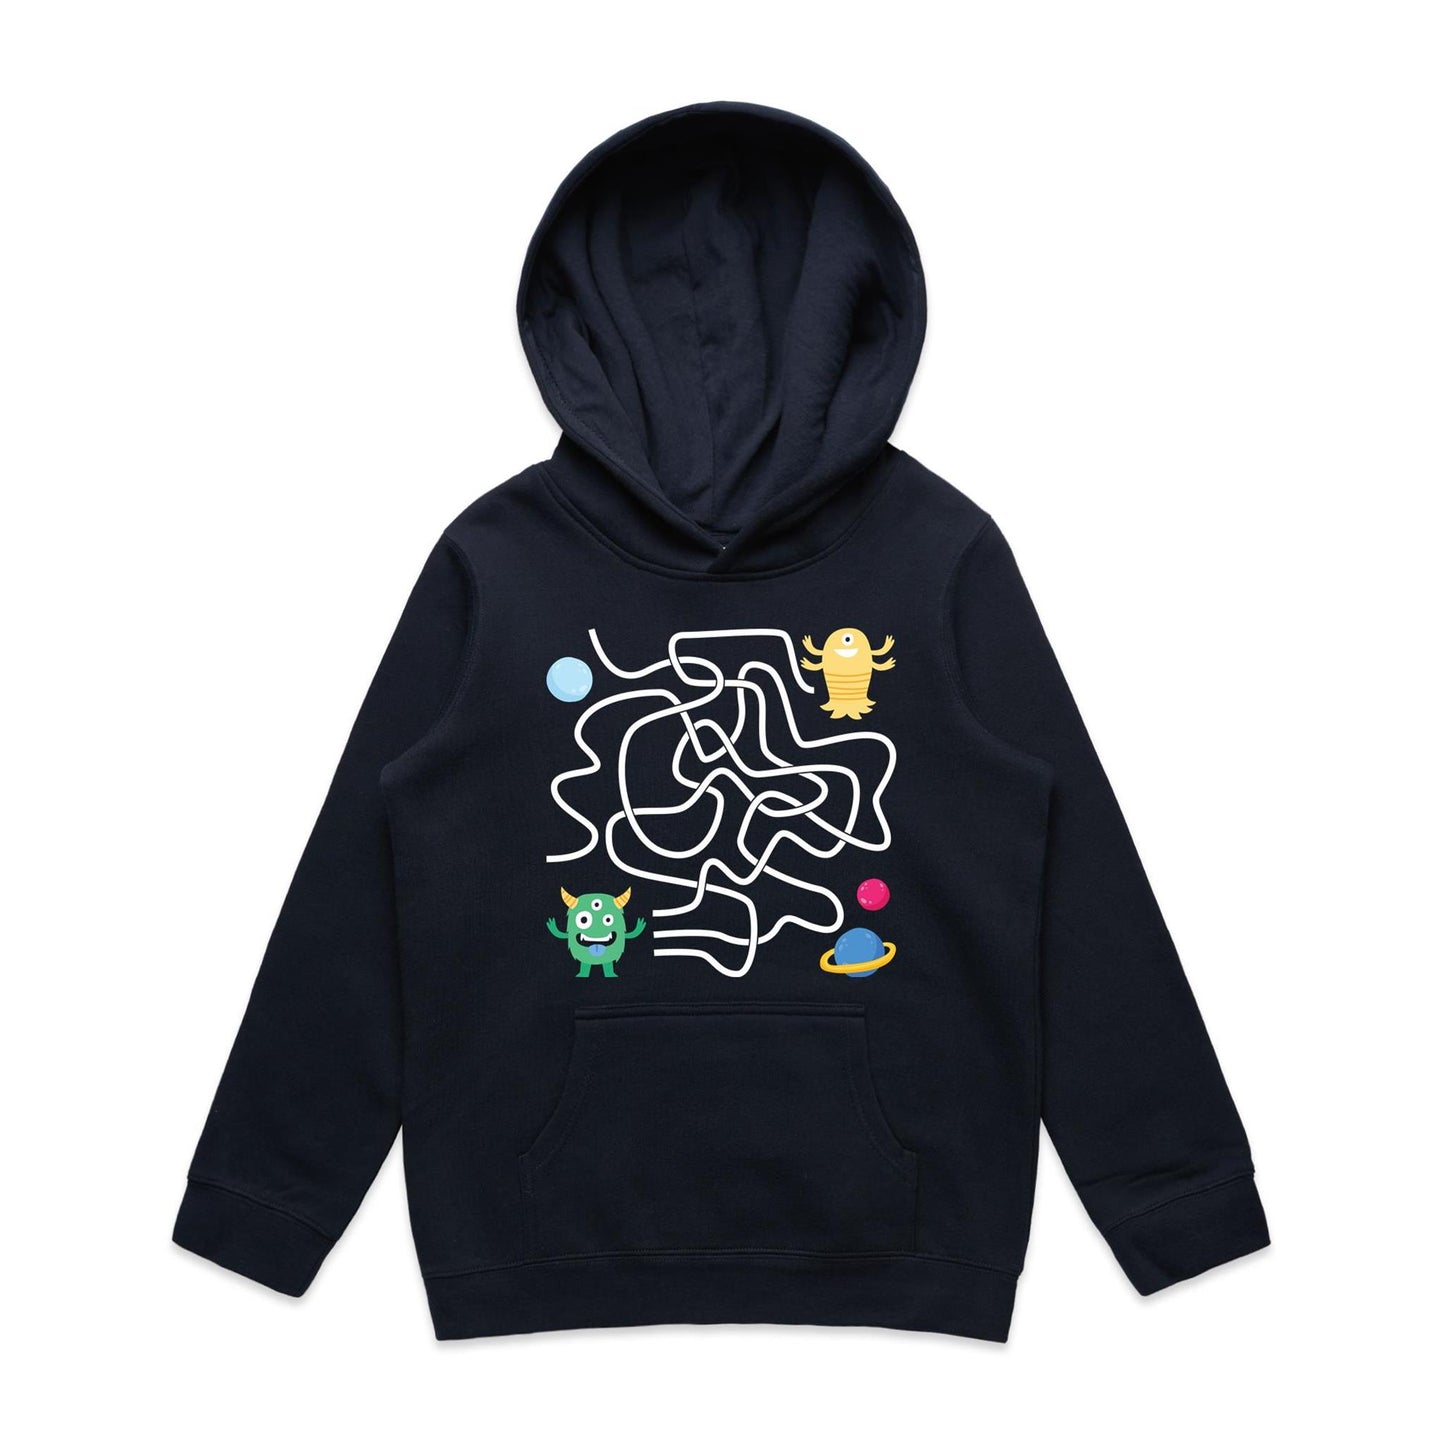 Find The Right Path, Space Alien - Youth Supply Hood Navy Kids Hoodie Sci Fi Space